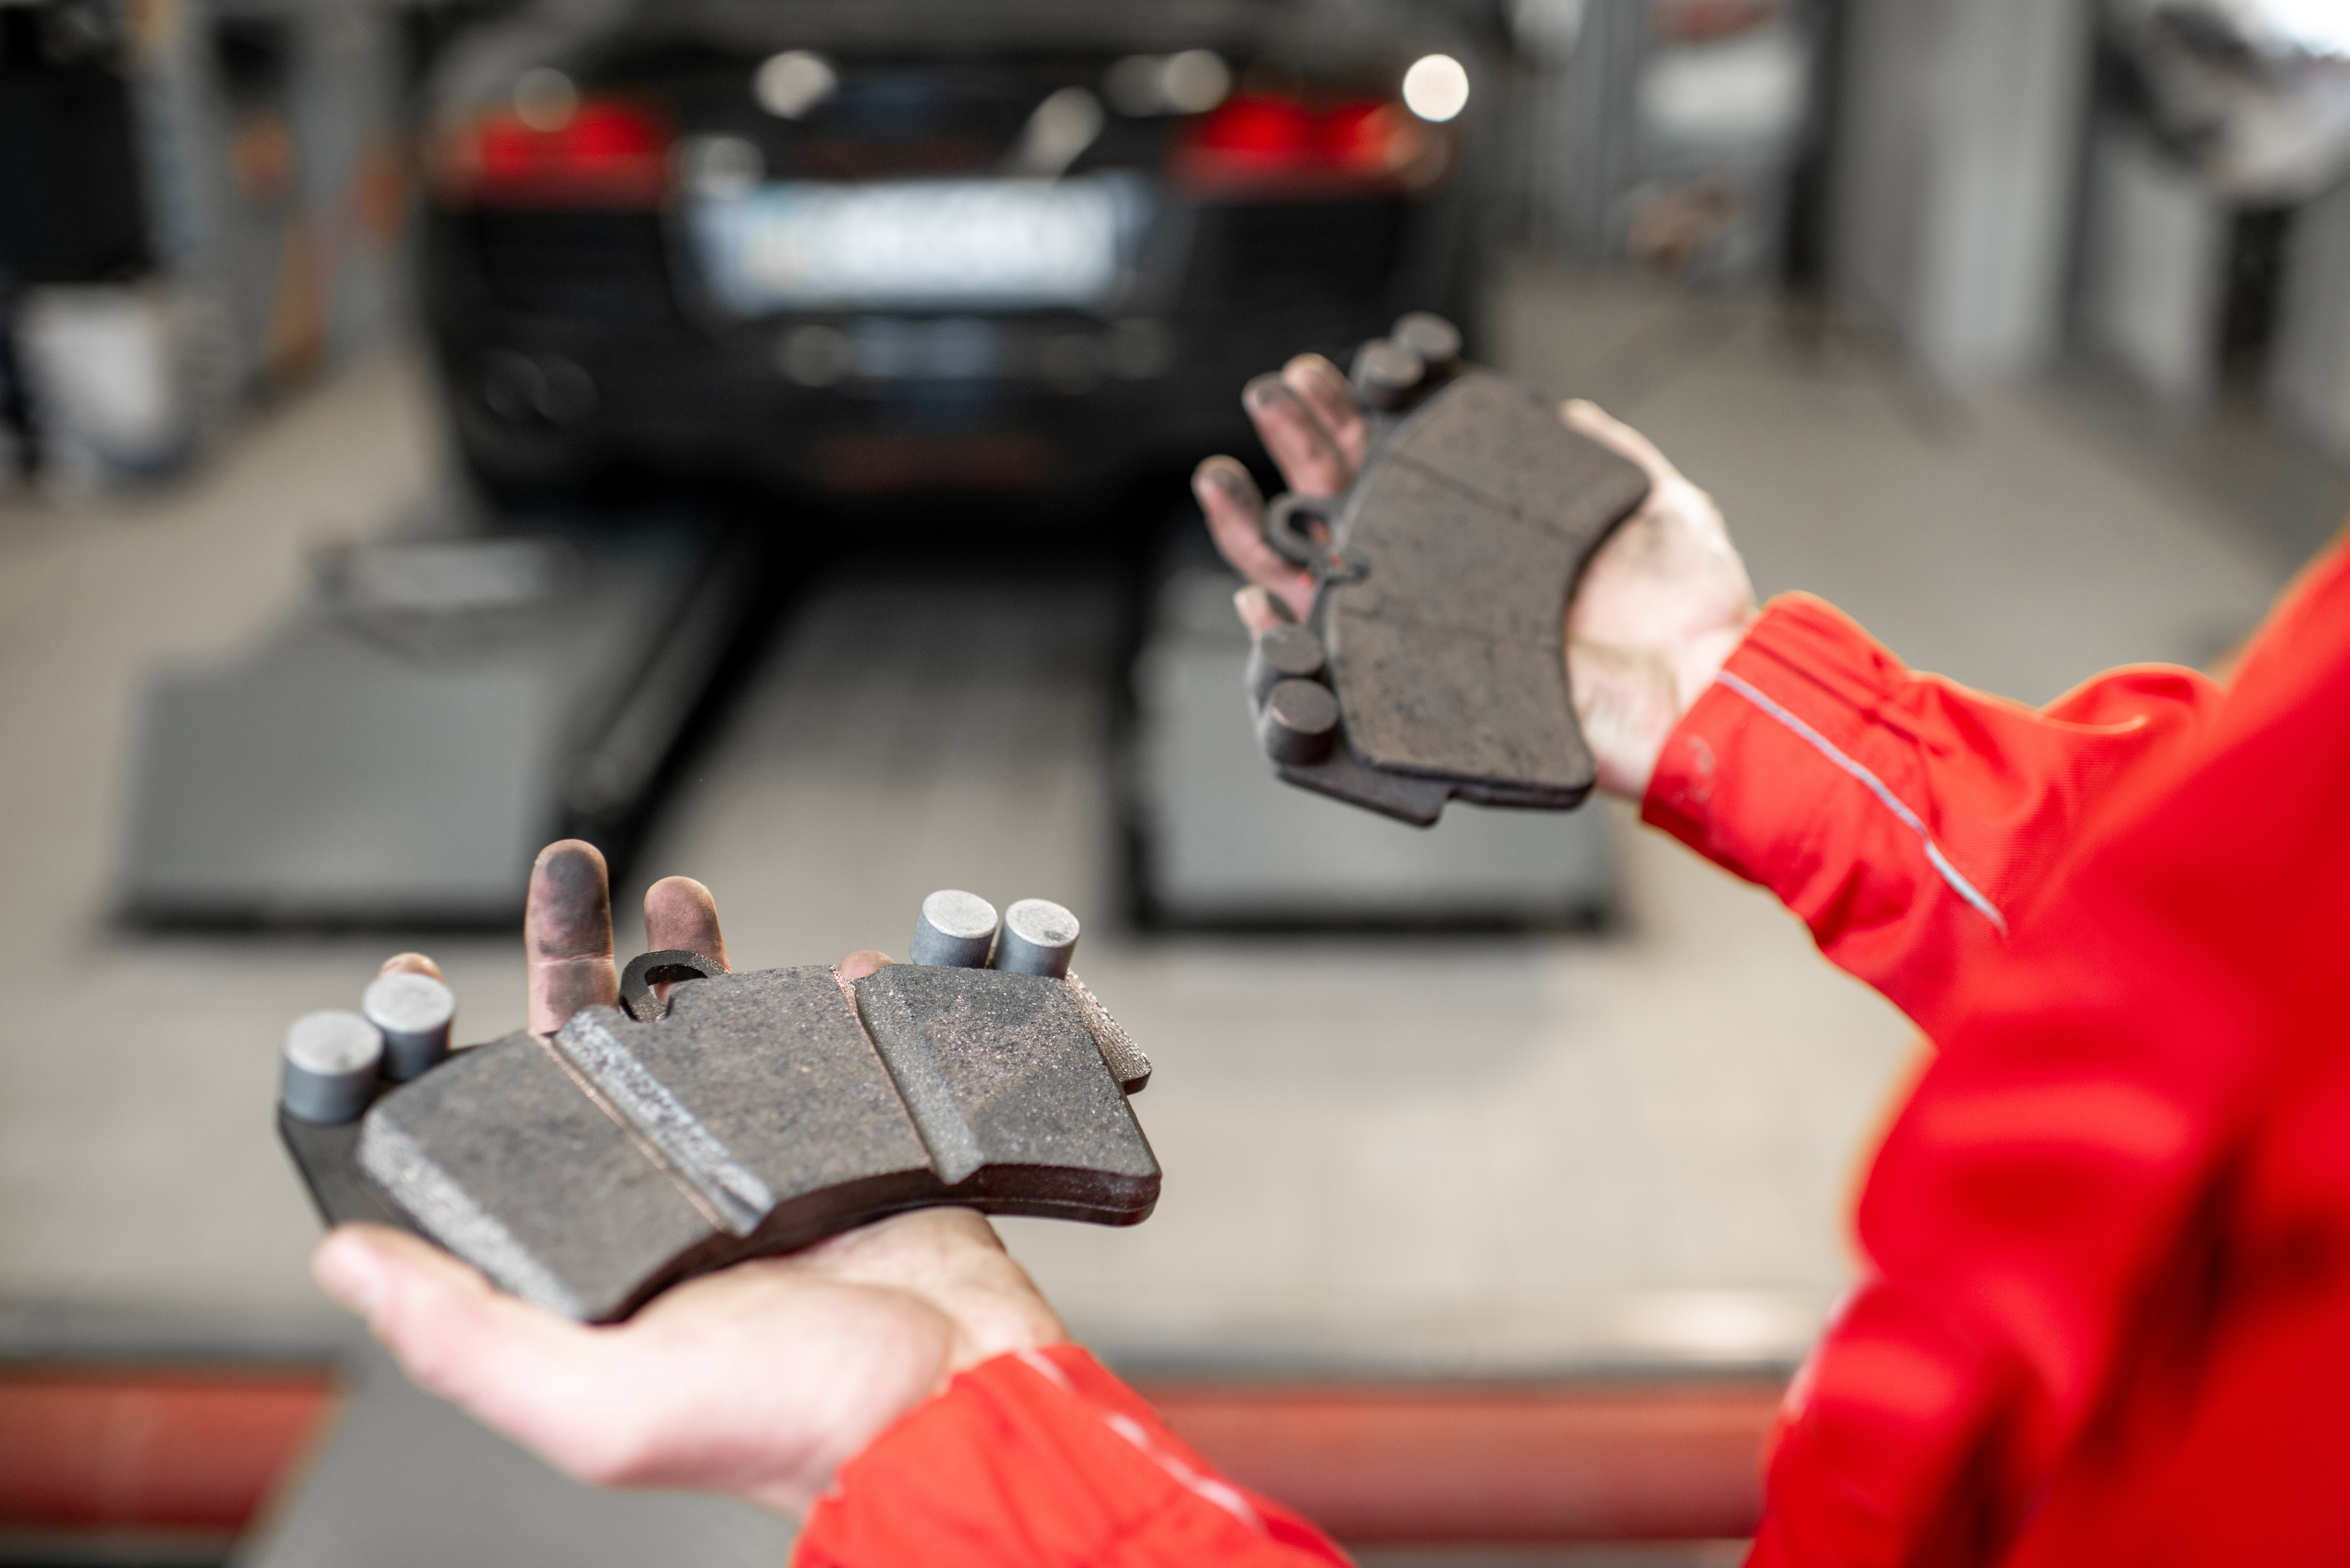 Brake Pads - Different Types, How They are Graded, and Which To Choose